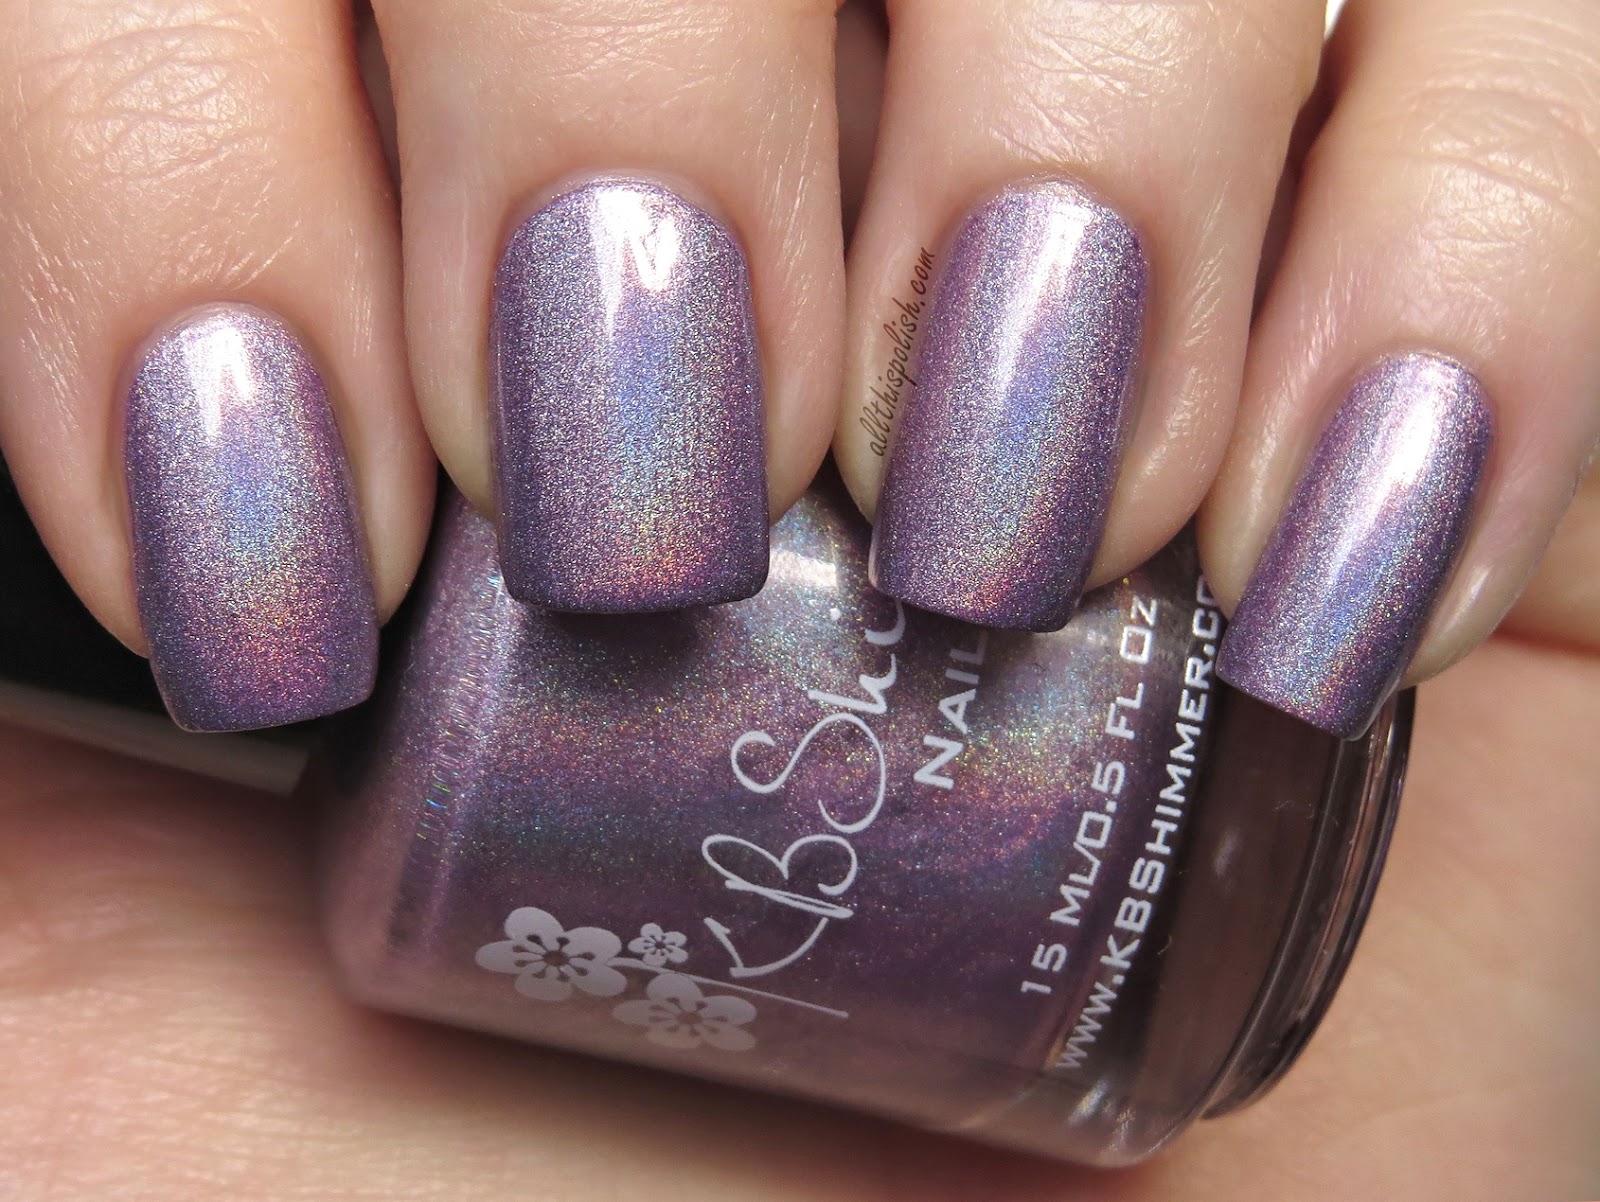 KBShimmer Thistle Be The Day